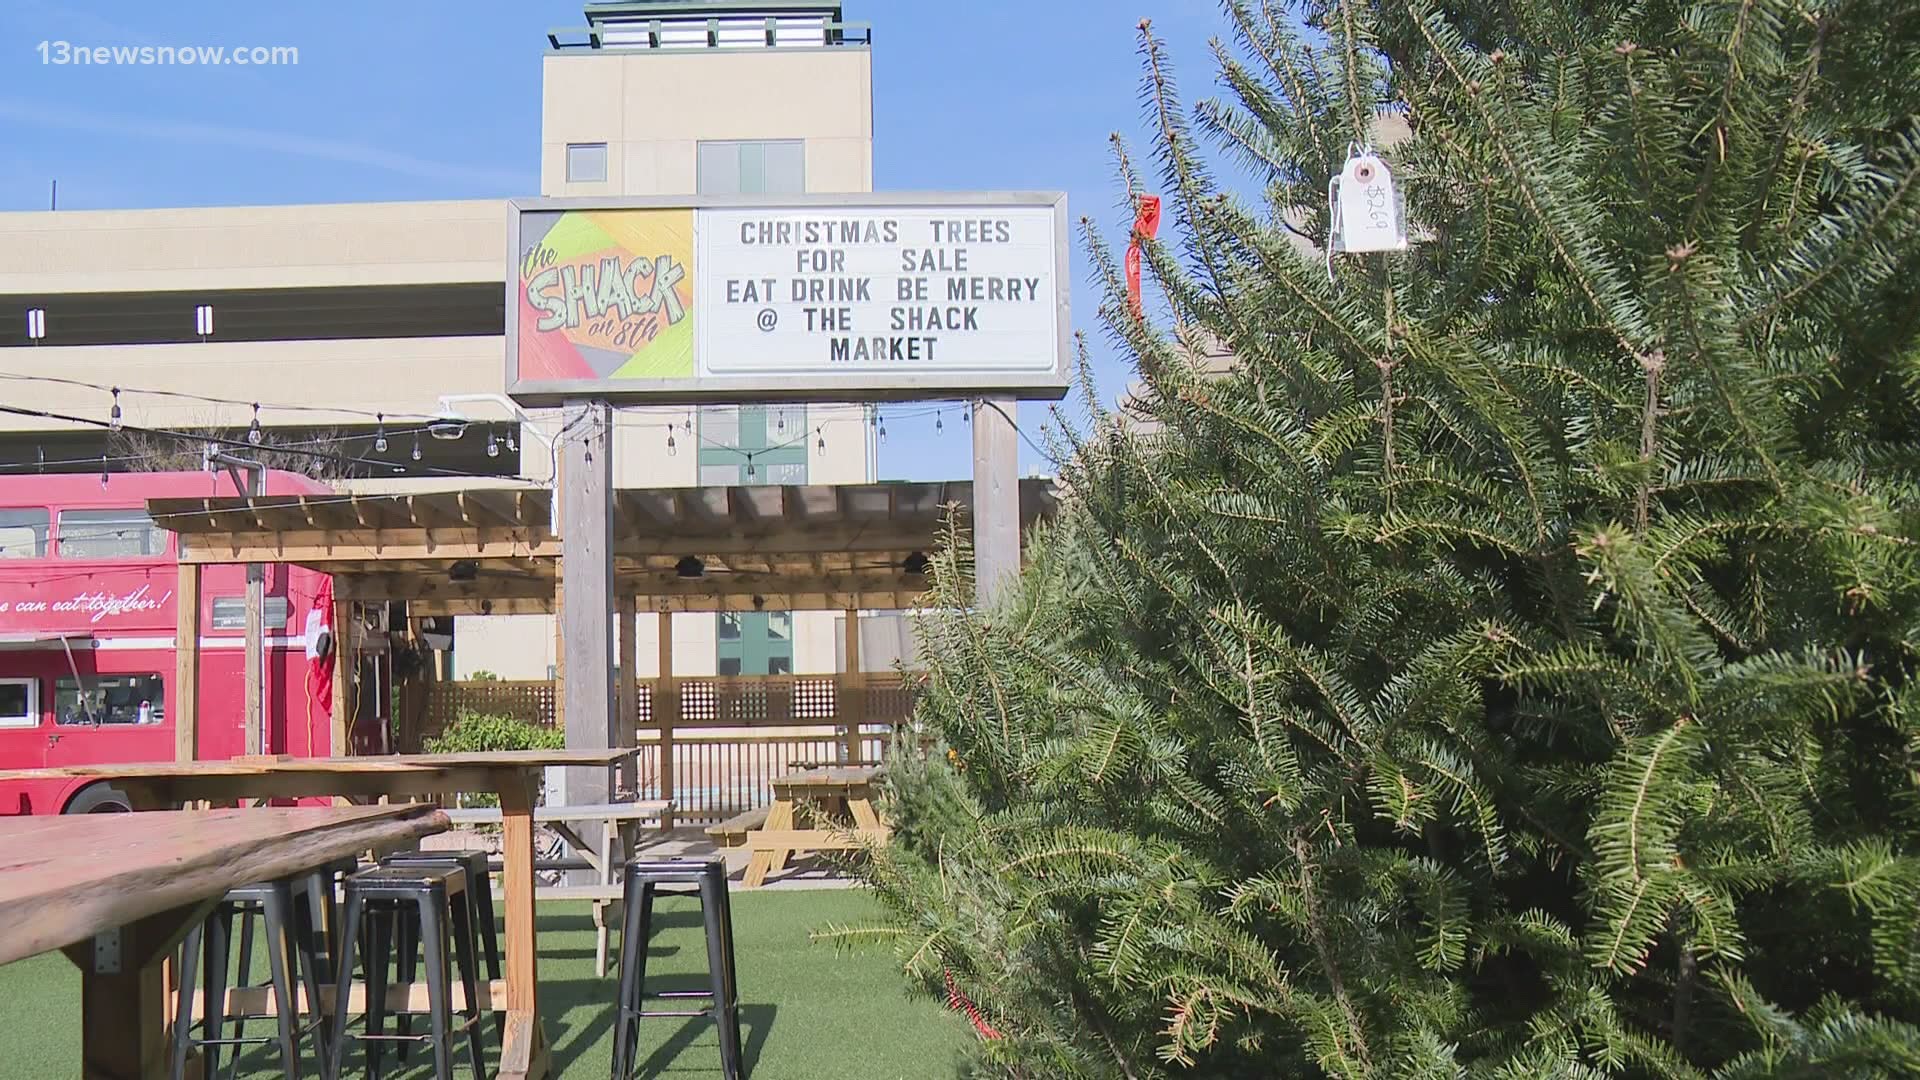 The Shack in Virginia Beach said it over exceeded goals this year and has leftover Christmas trees to give away for free.